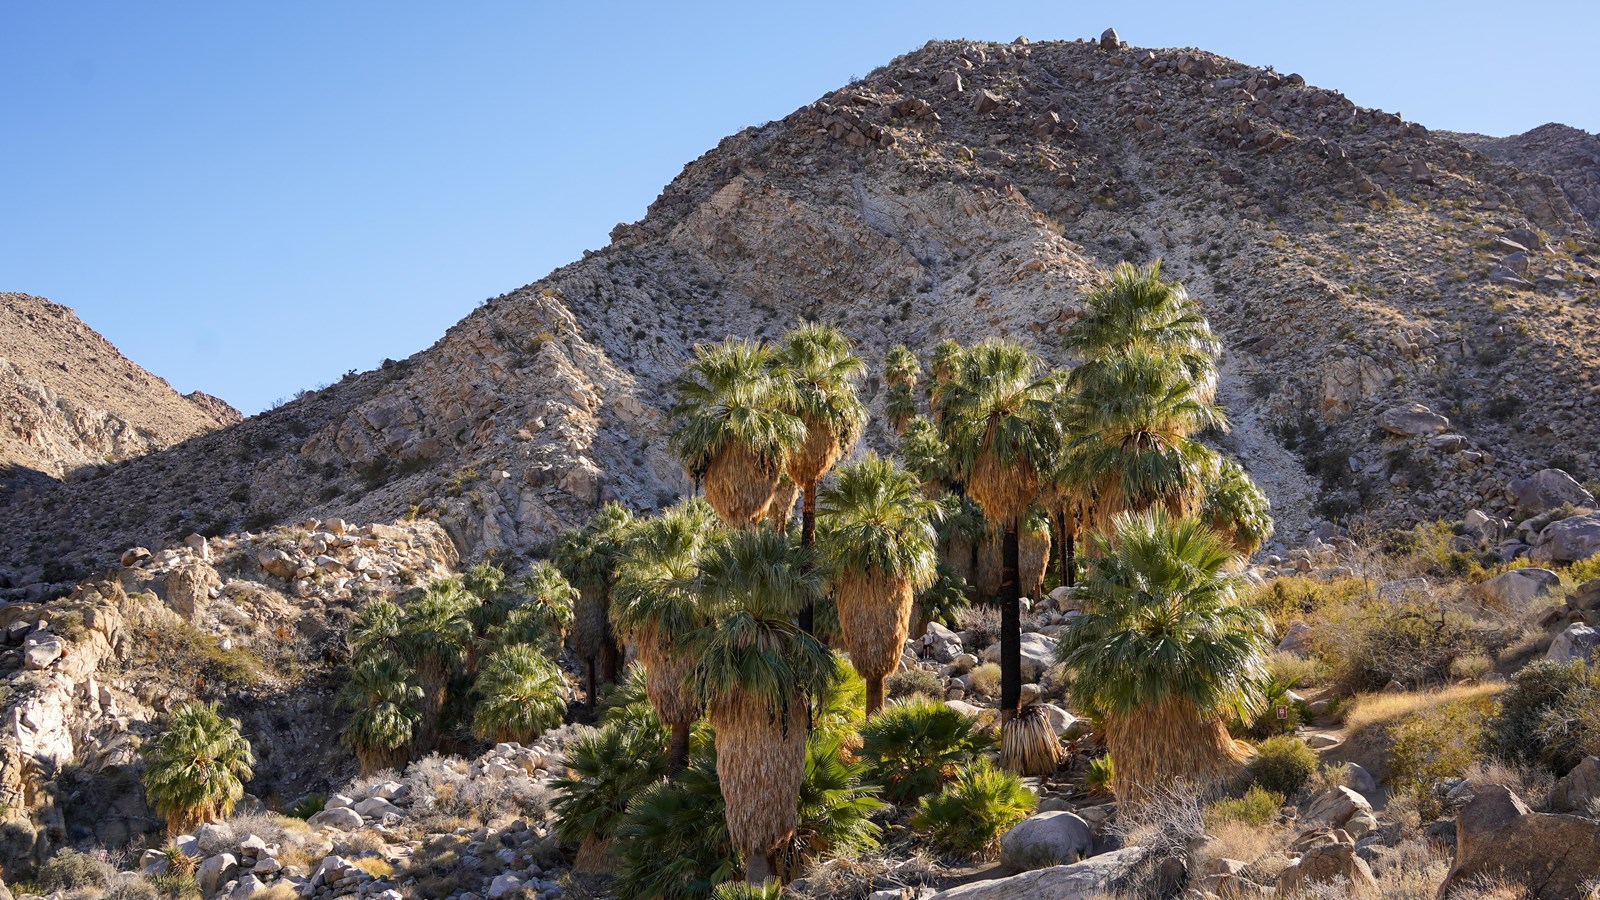 A group of fan palms sits amongst a rocky canyon with rocky mountains in the background.